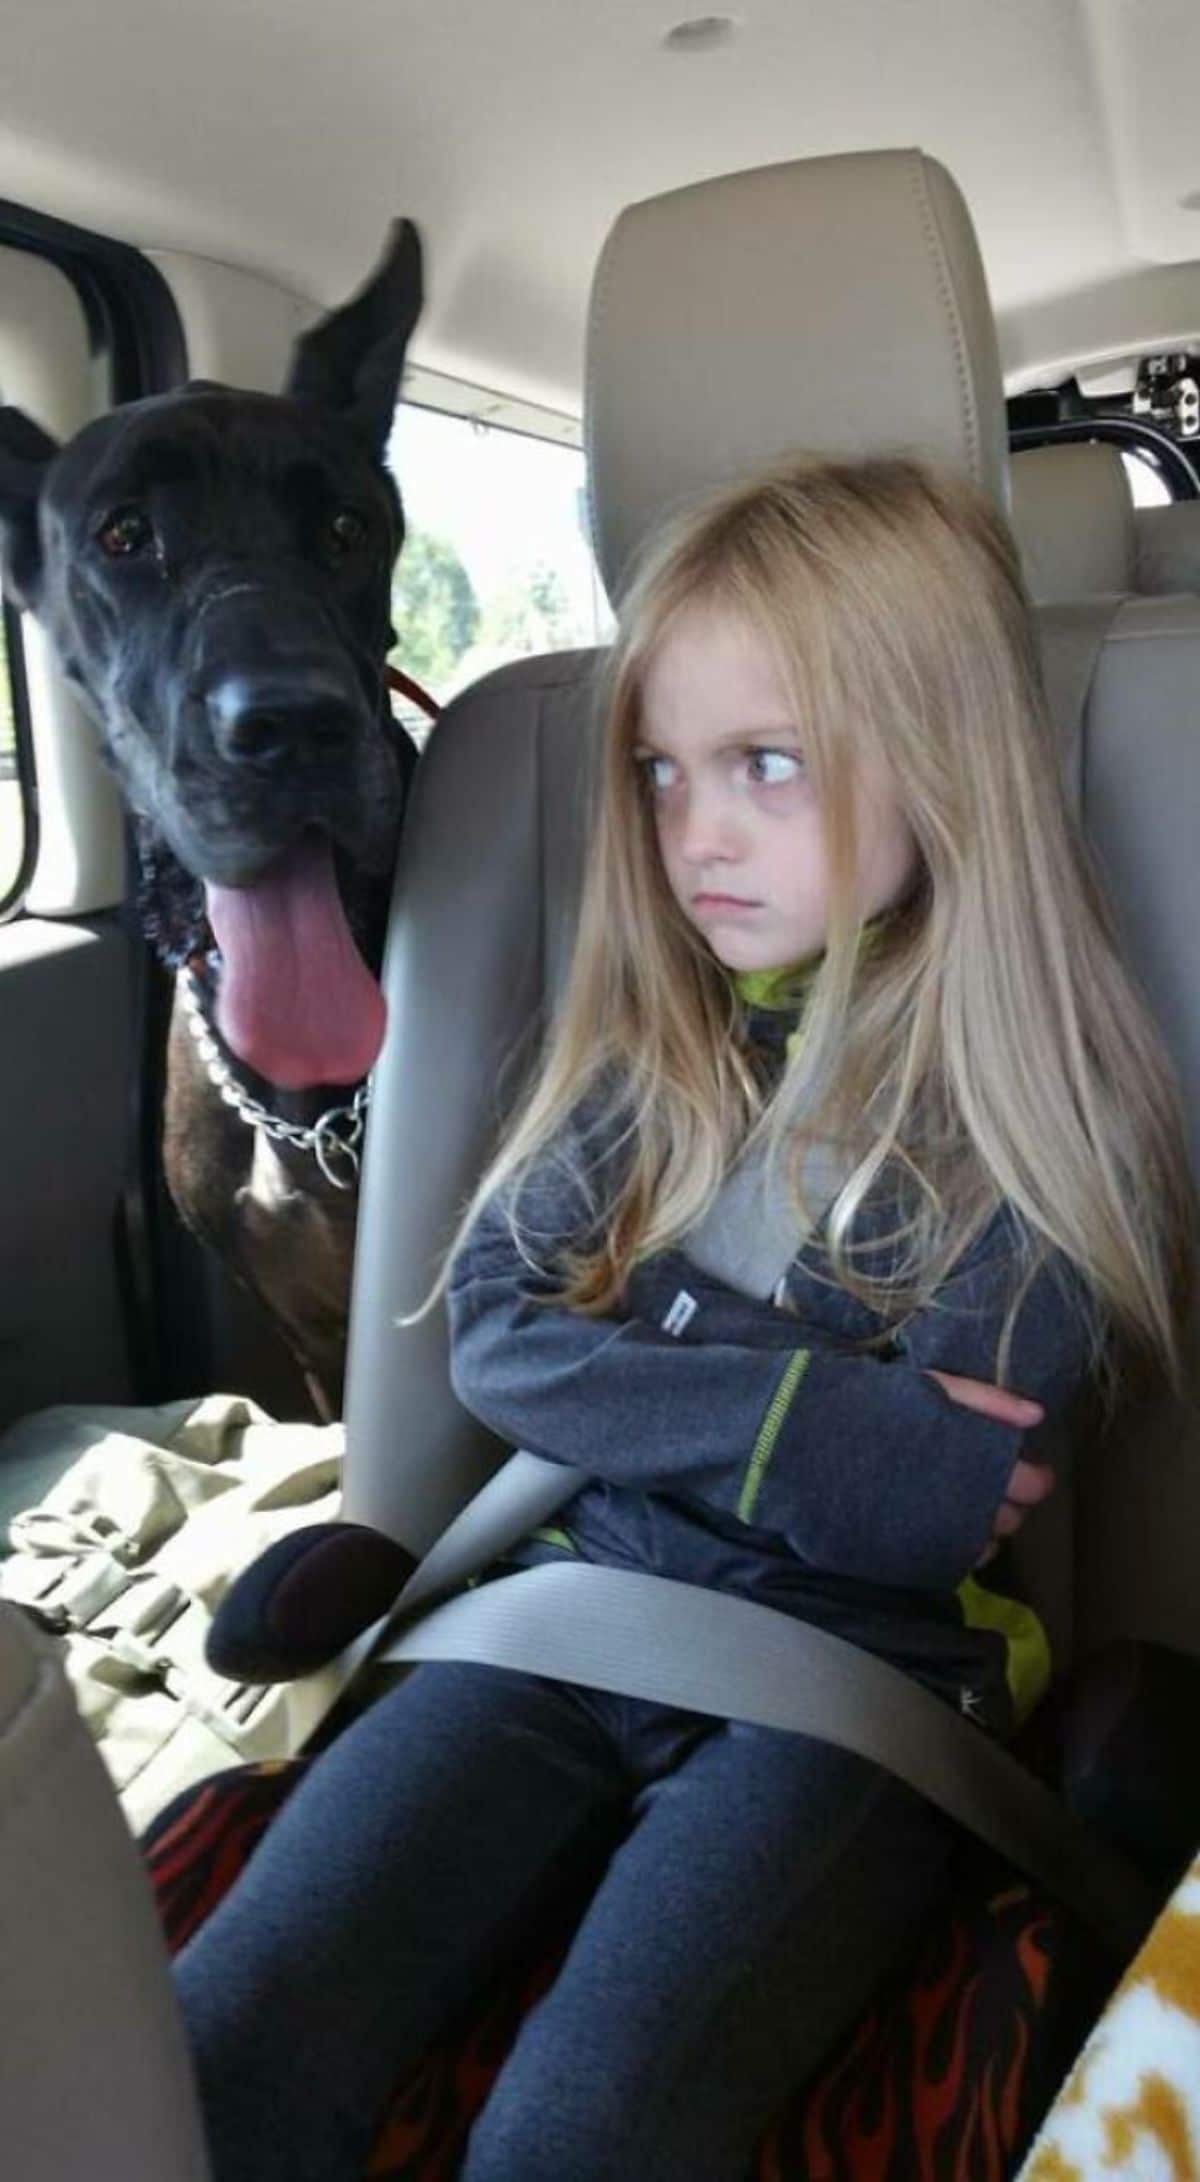 black dog with the tongue sticking out next to an angry girl inside a car